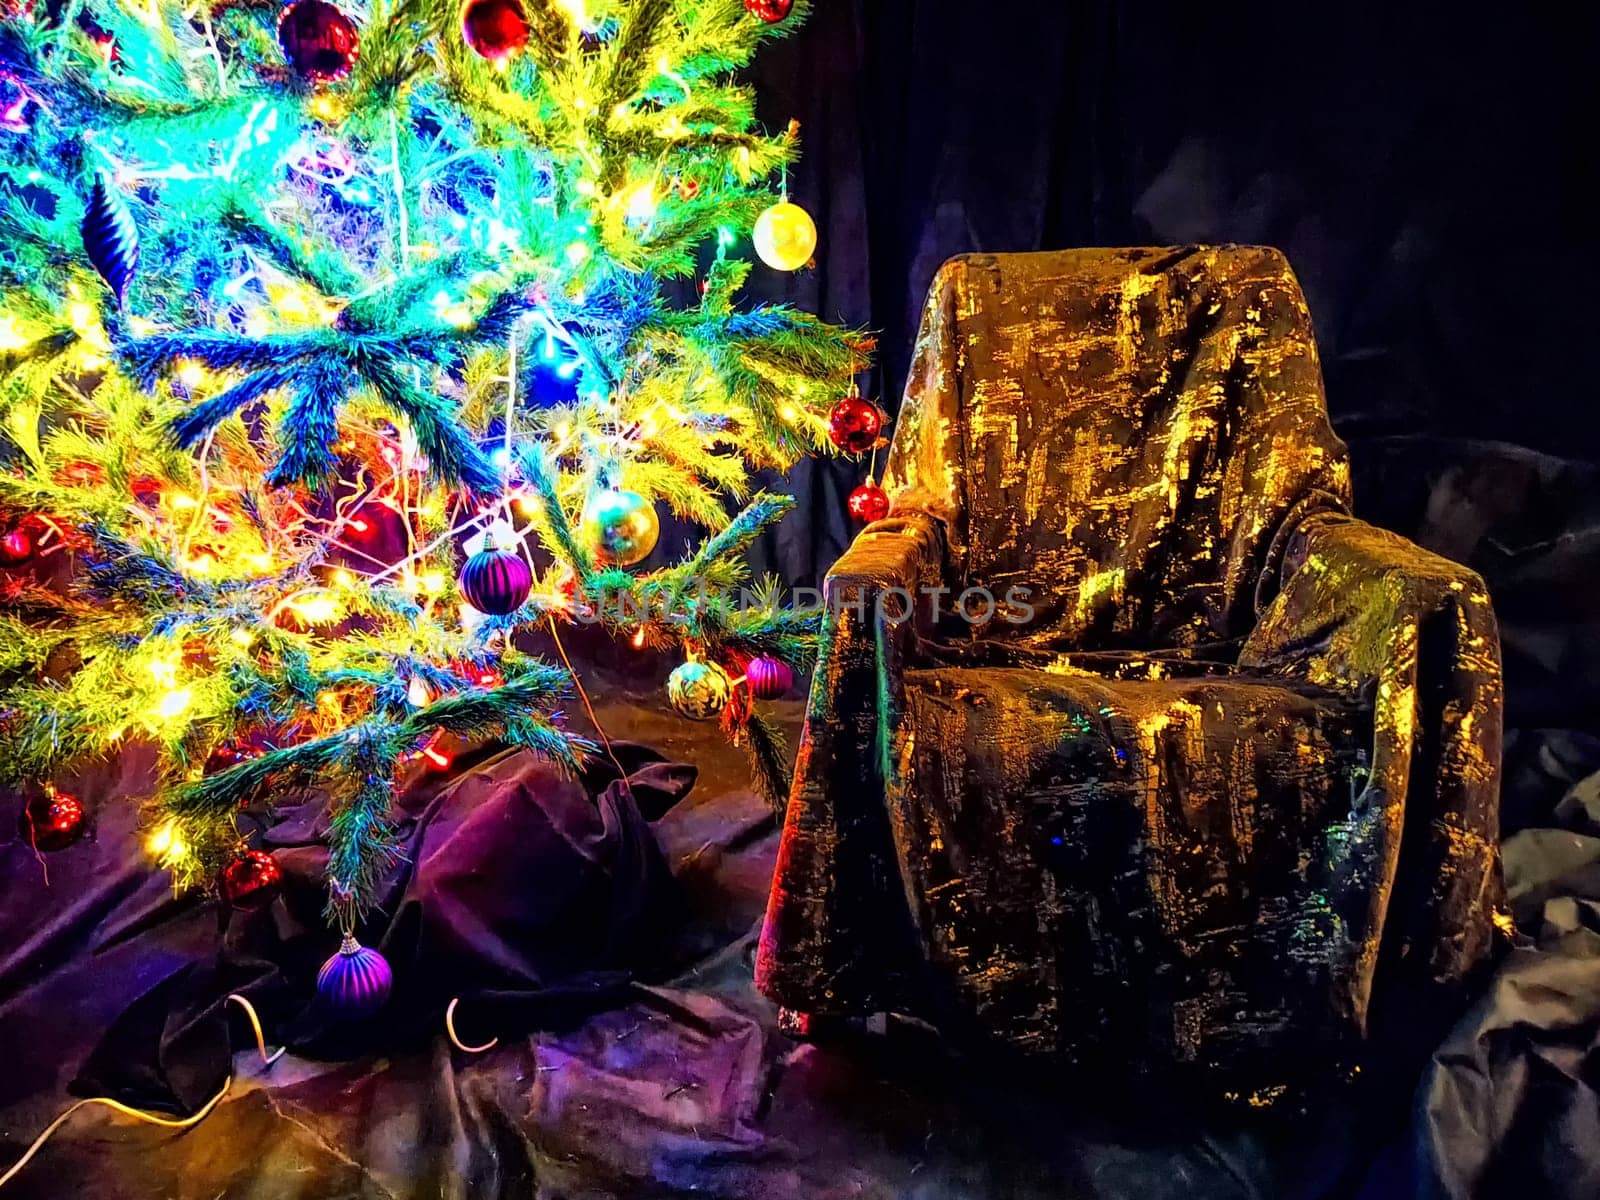 A beautifully decorated Christmas tree next to a luxurious chair. Festive Christmas Tree With Illuminated Lights Beside an Ornate Chair by keleny